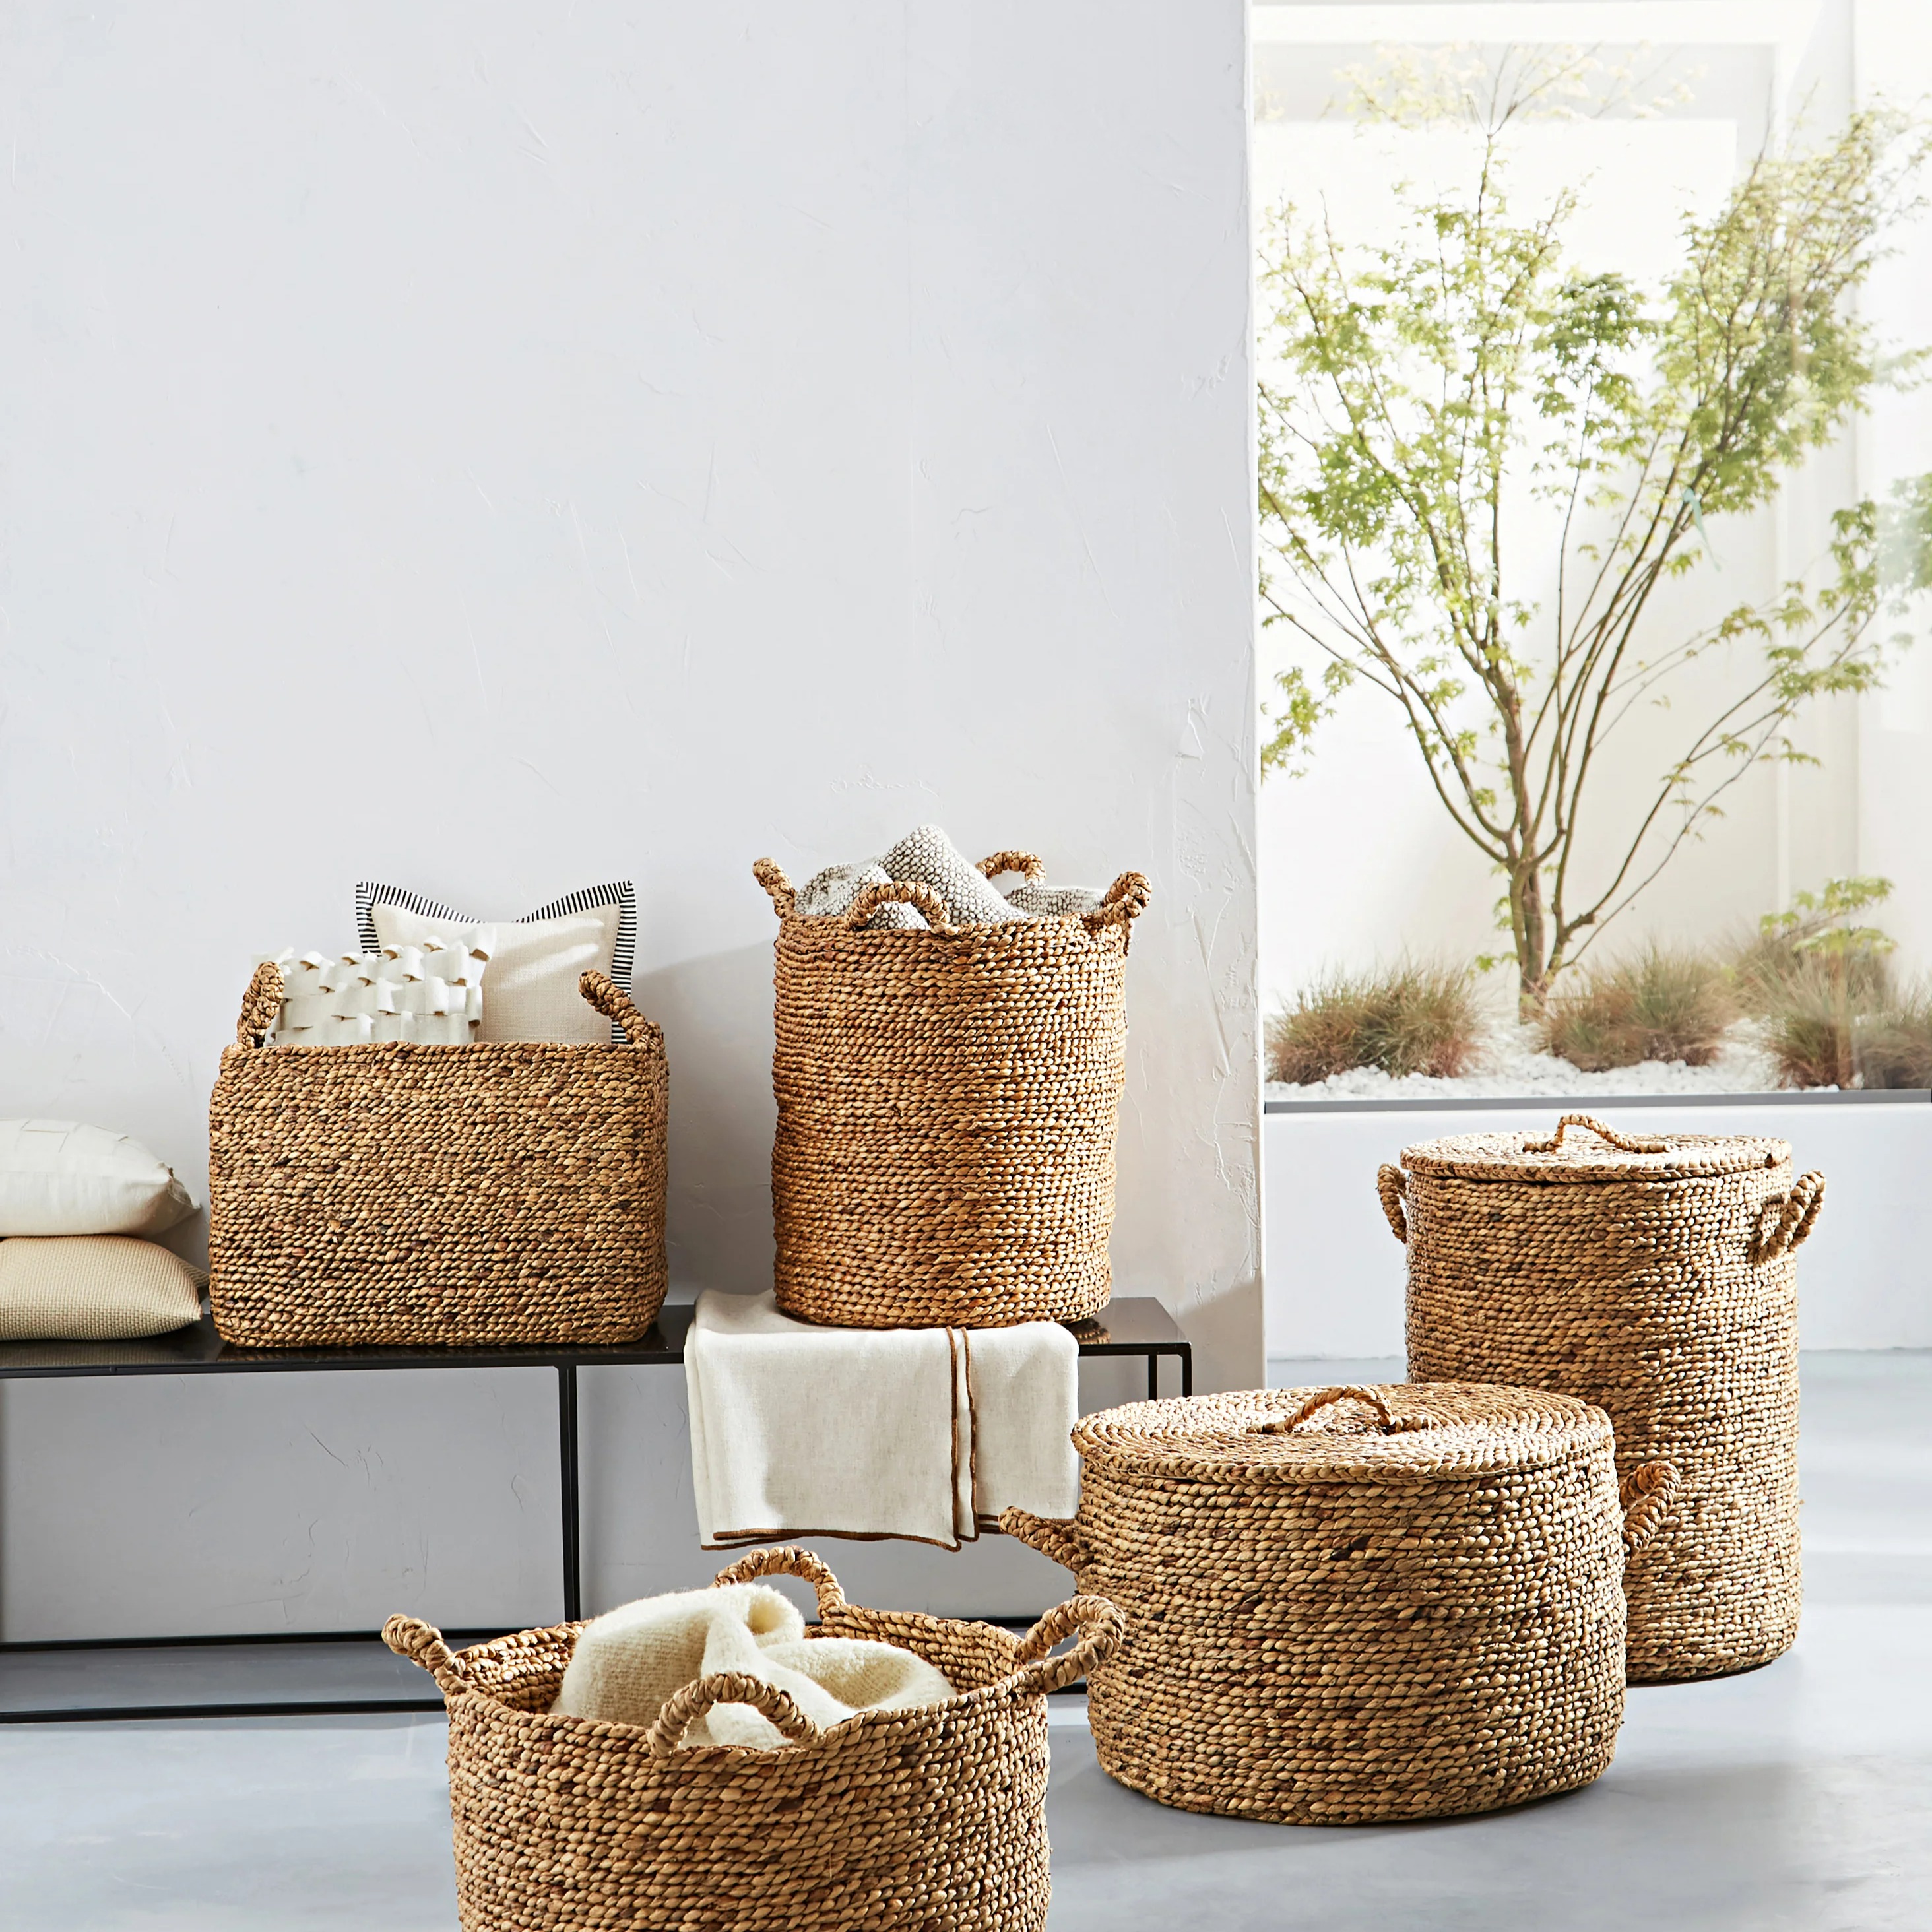 Baskets & Boxes up to 30% off